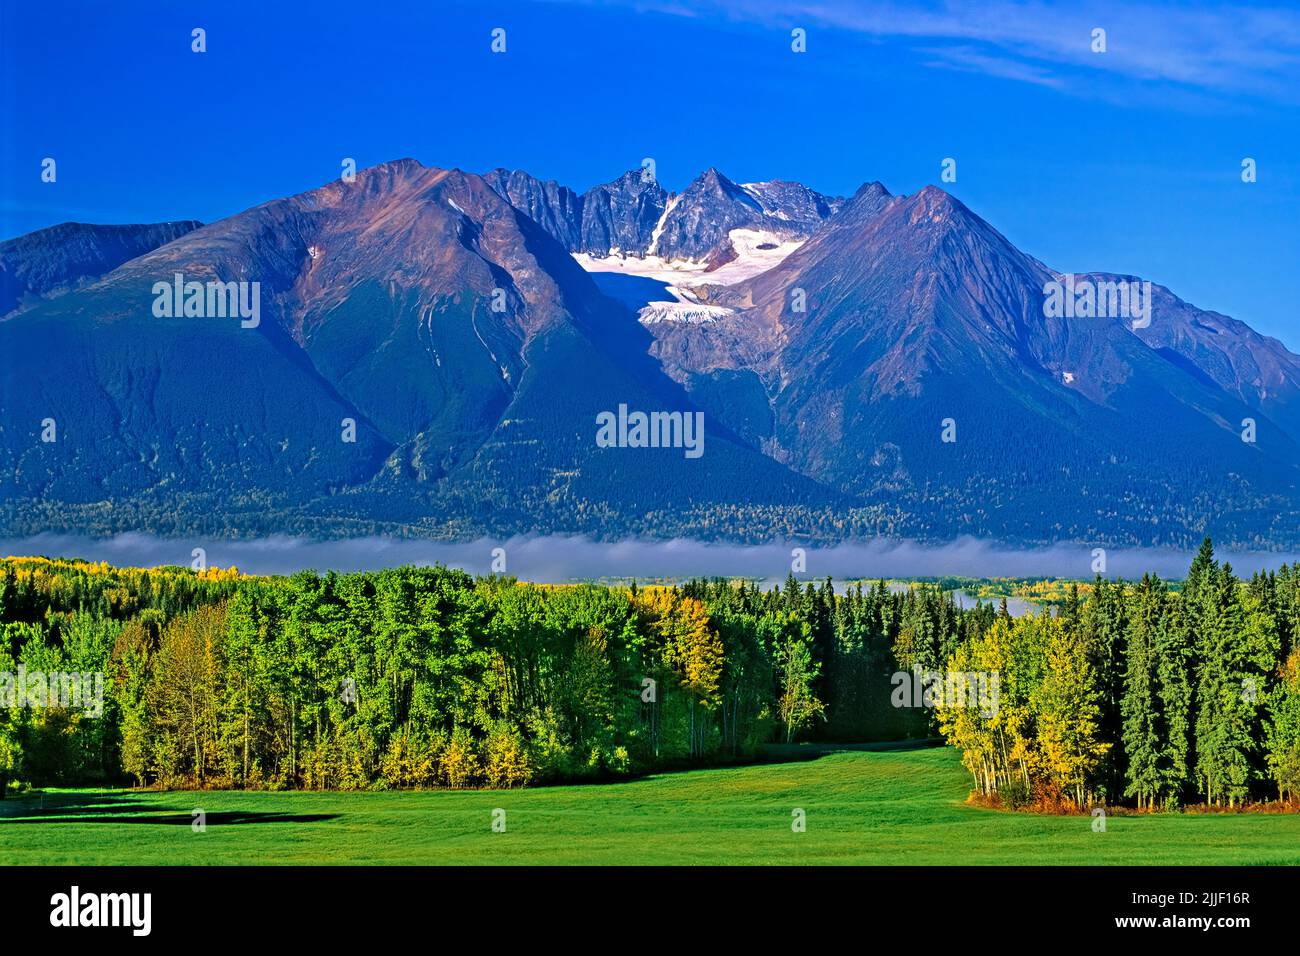 An early fall landscape of Hudson Bay Mountain located near Smithers British Columbia Canada Stock Photo